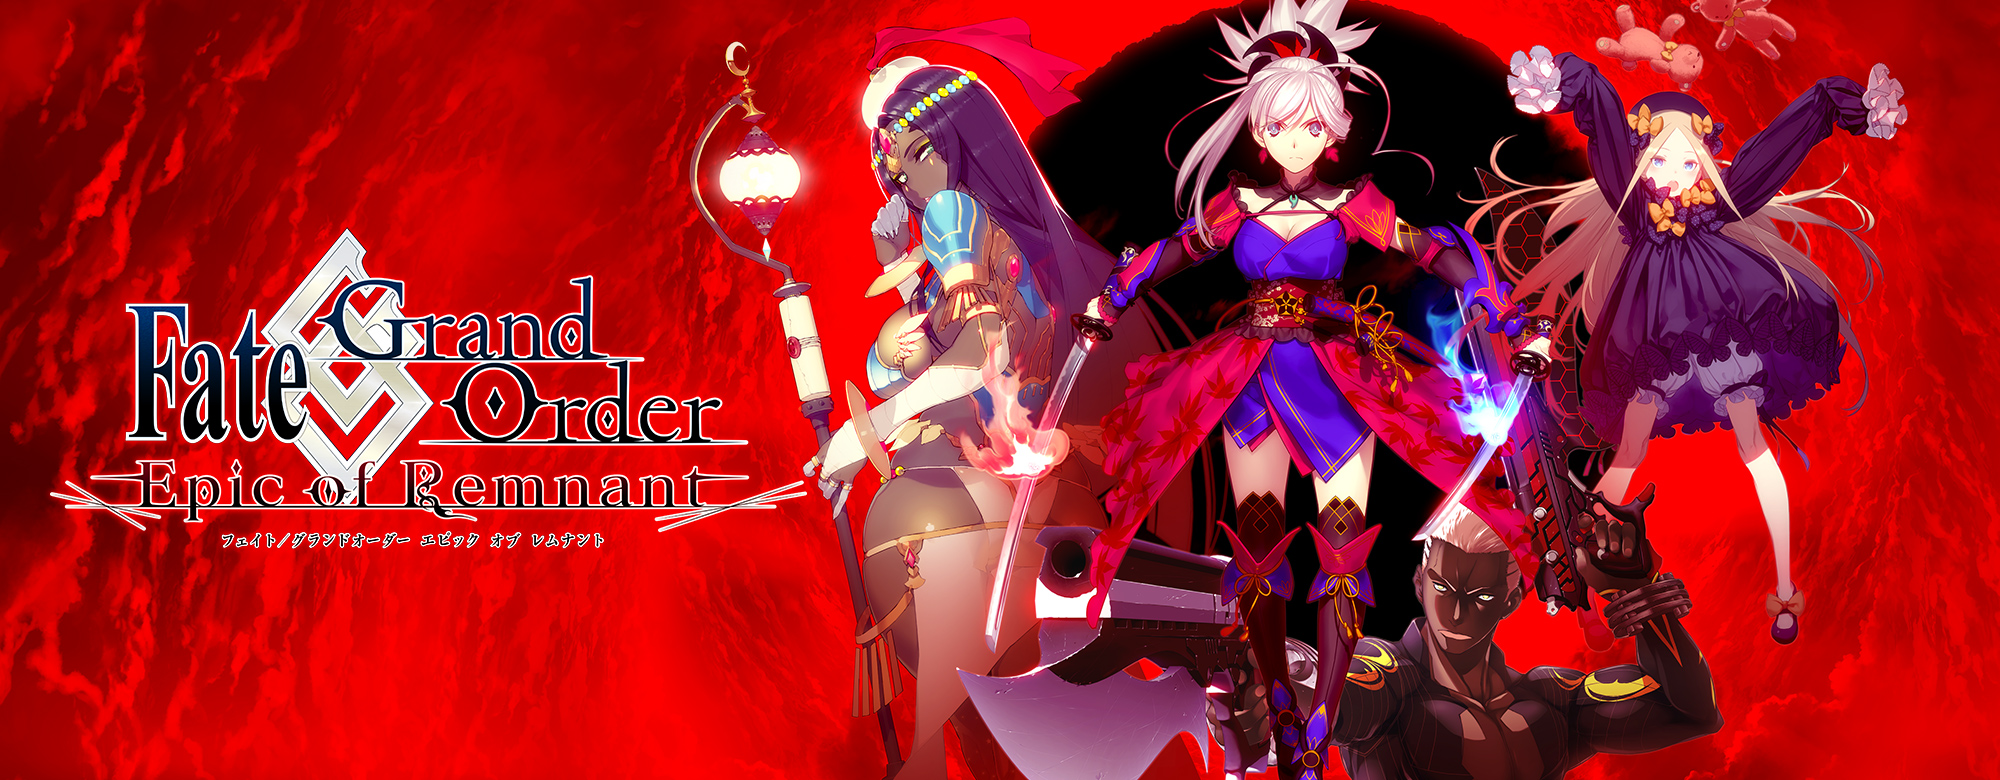 Fate/Grand Order -Epic of Remnant-